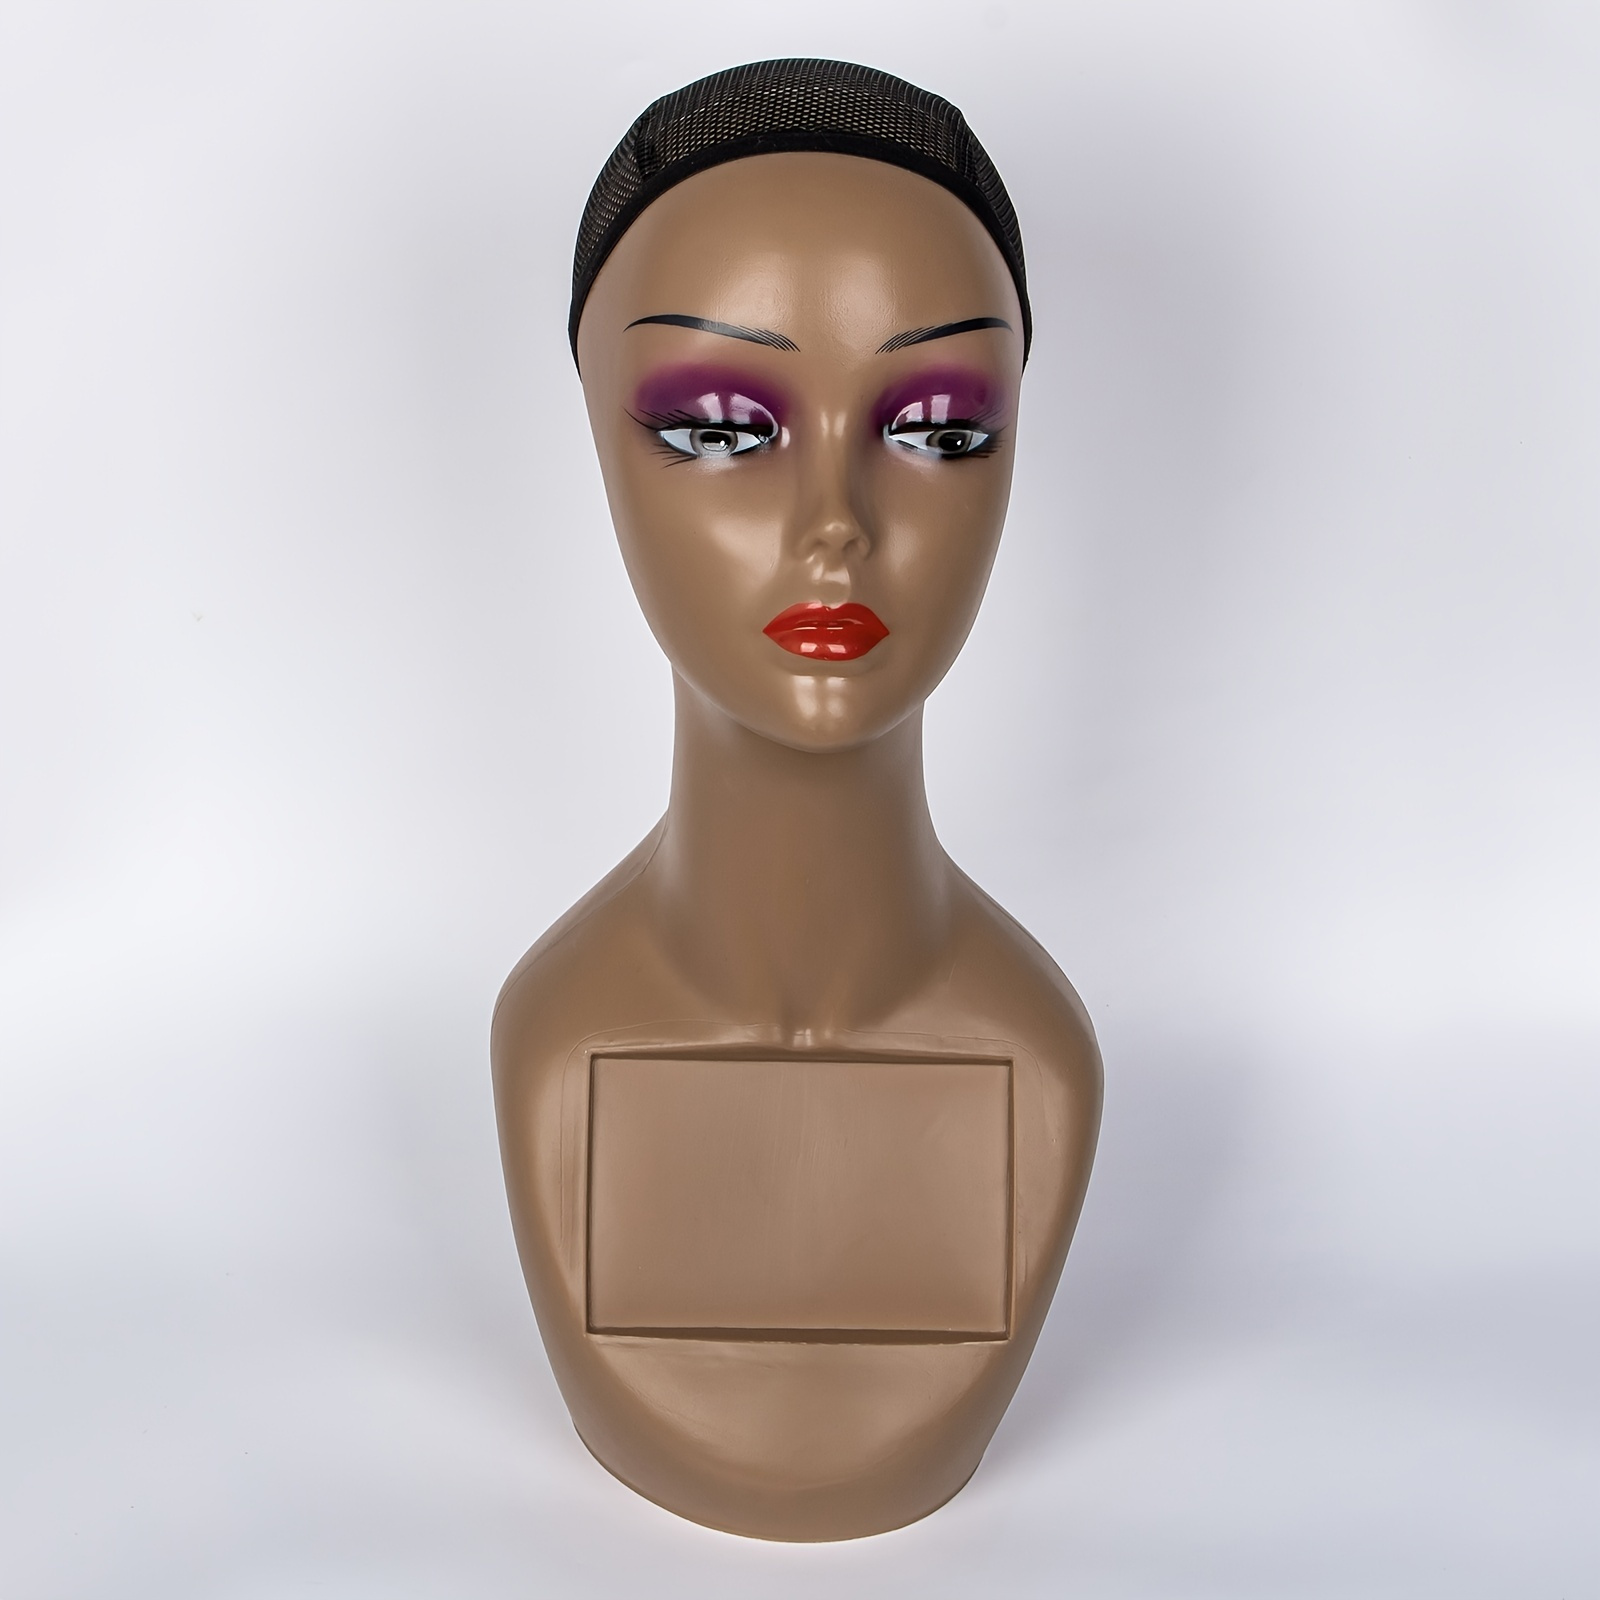 

Lifelike Female Mannequin Head For Wigs, Makeup, And Beauty Accessories Display - Realistic Design For Perfect Display